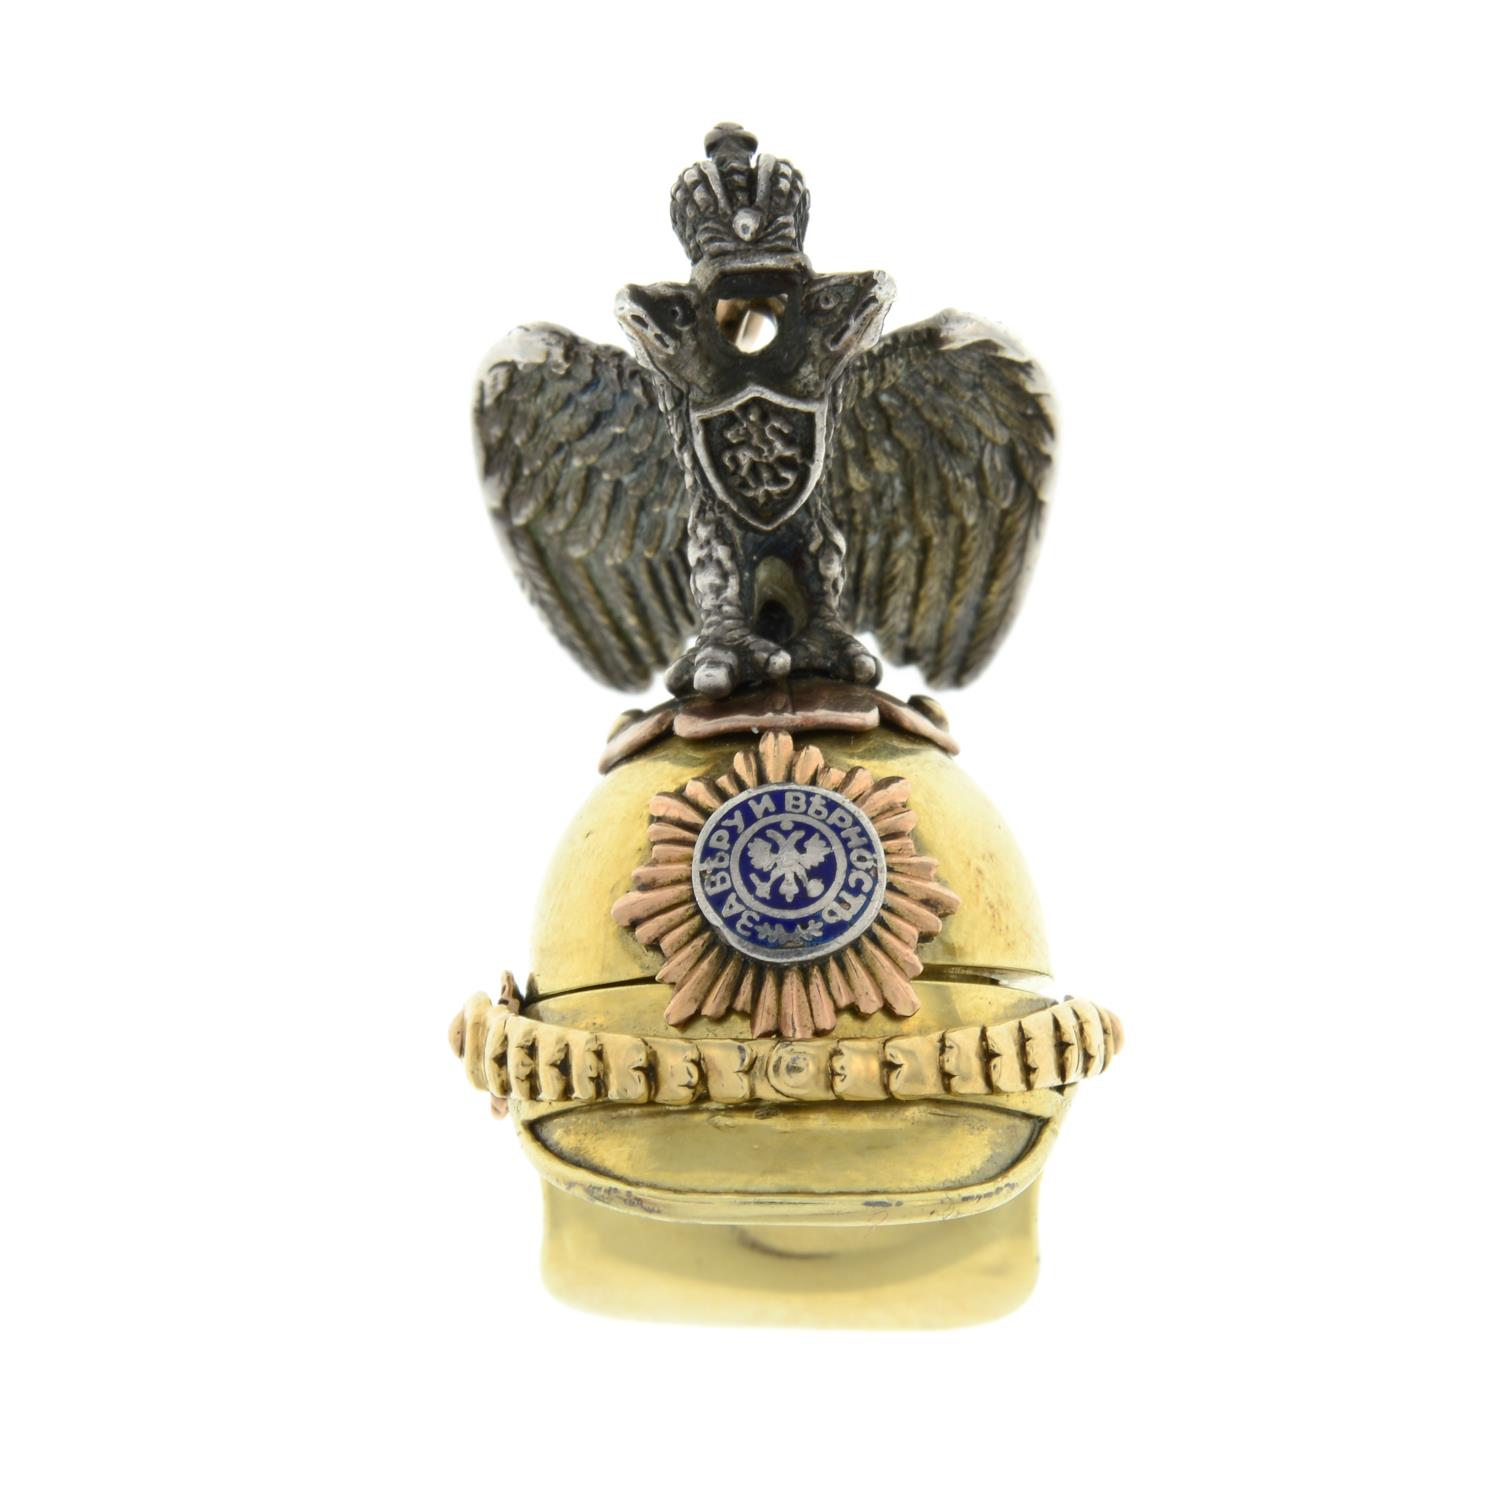 A Russian pre-Revolutionary silver and gold Imperial Russian Garde du Korps NCO's parade helmet - Image 2 of 7